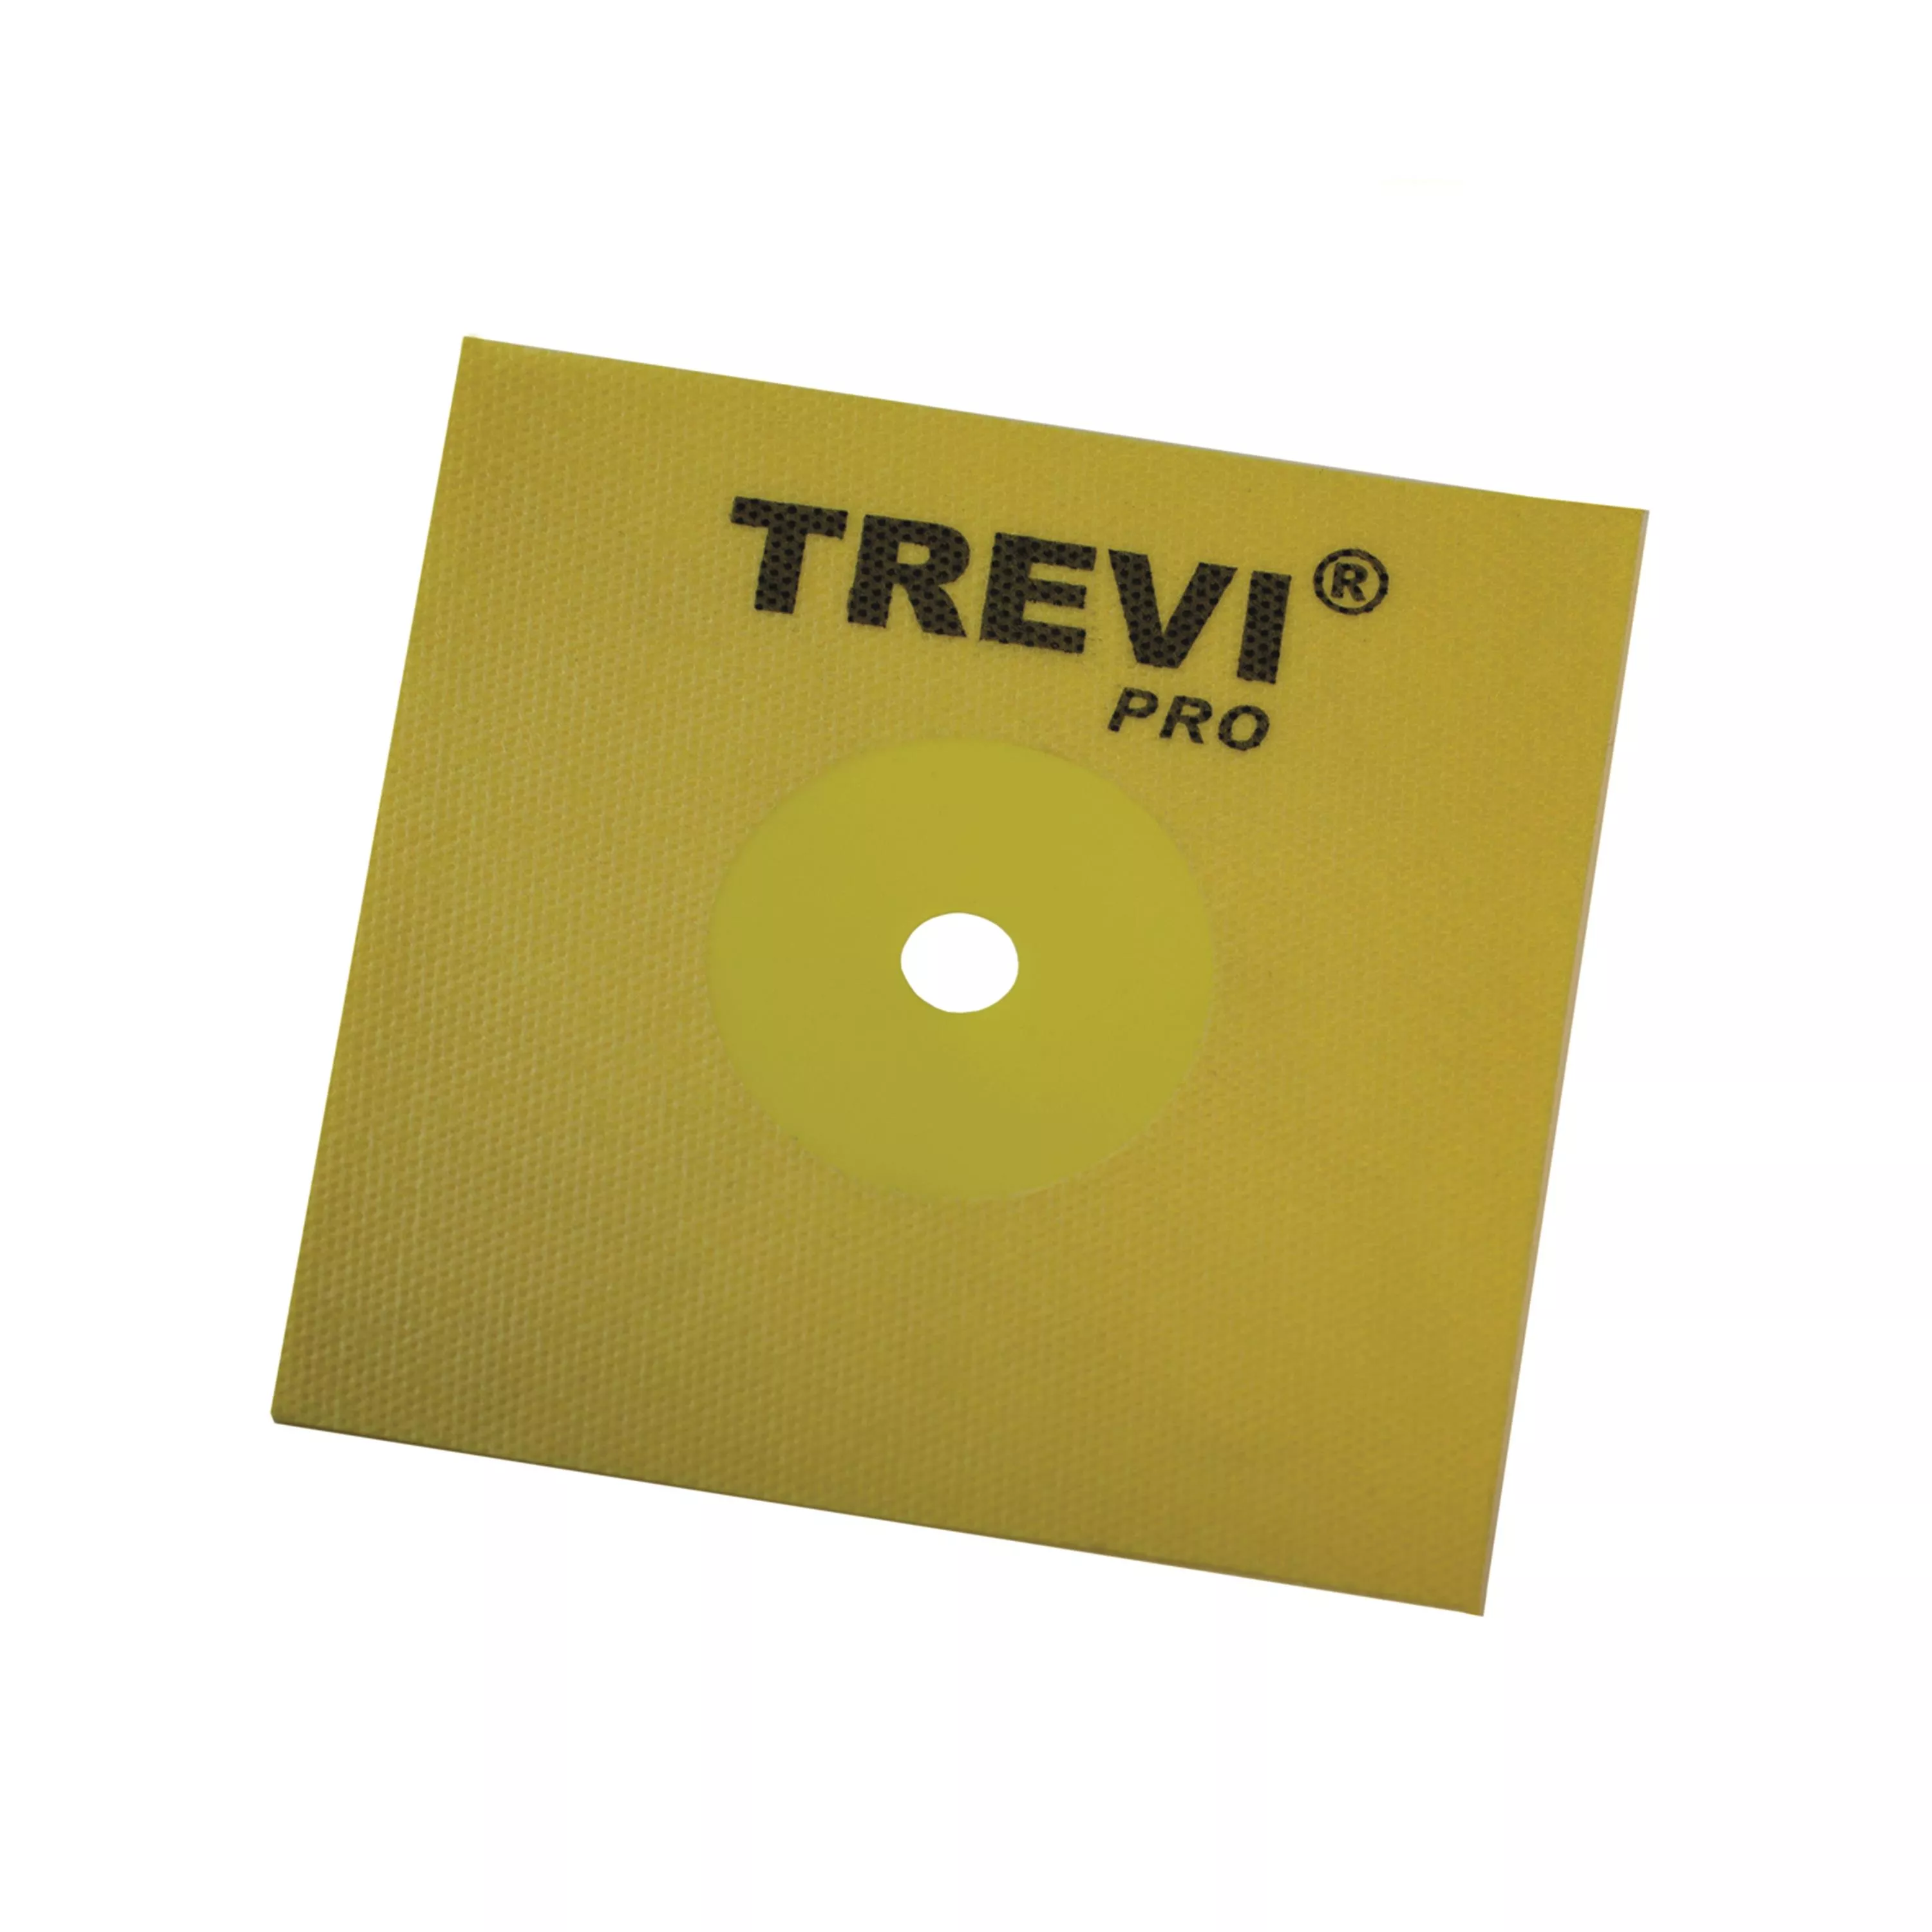 Trevi Pro Roterende Zone Afdichtingsmanchet Wand